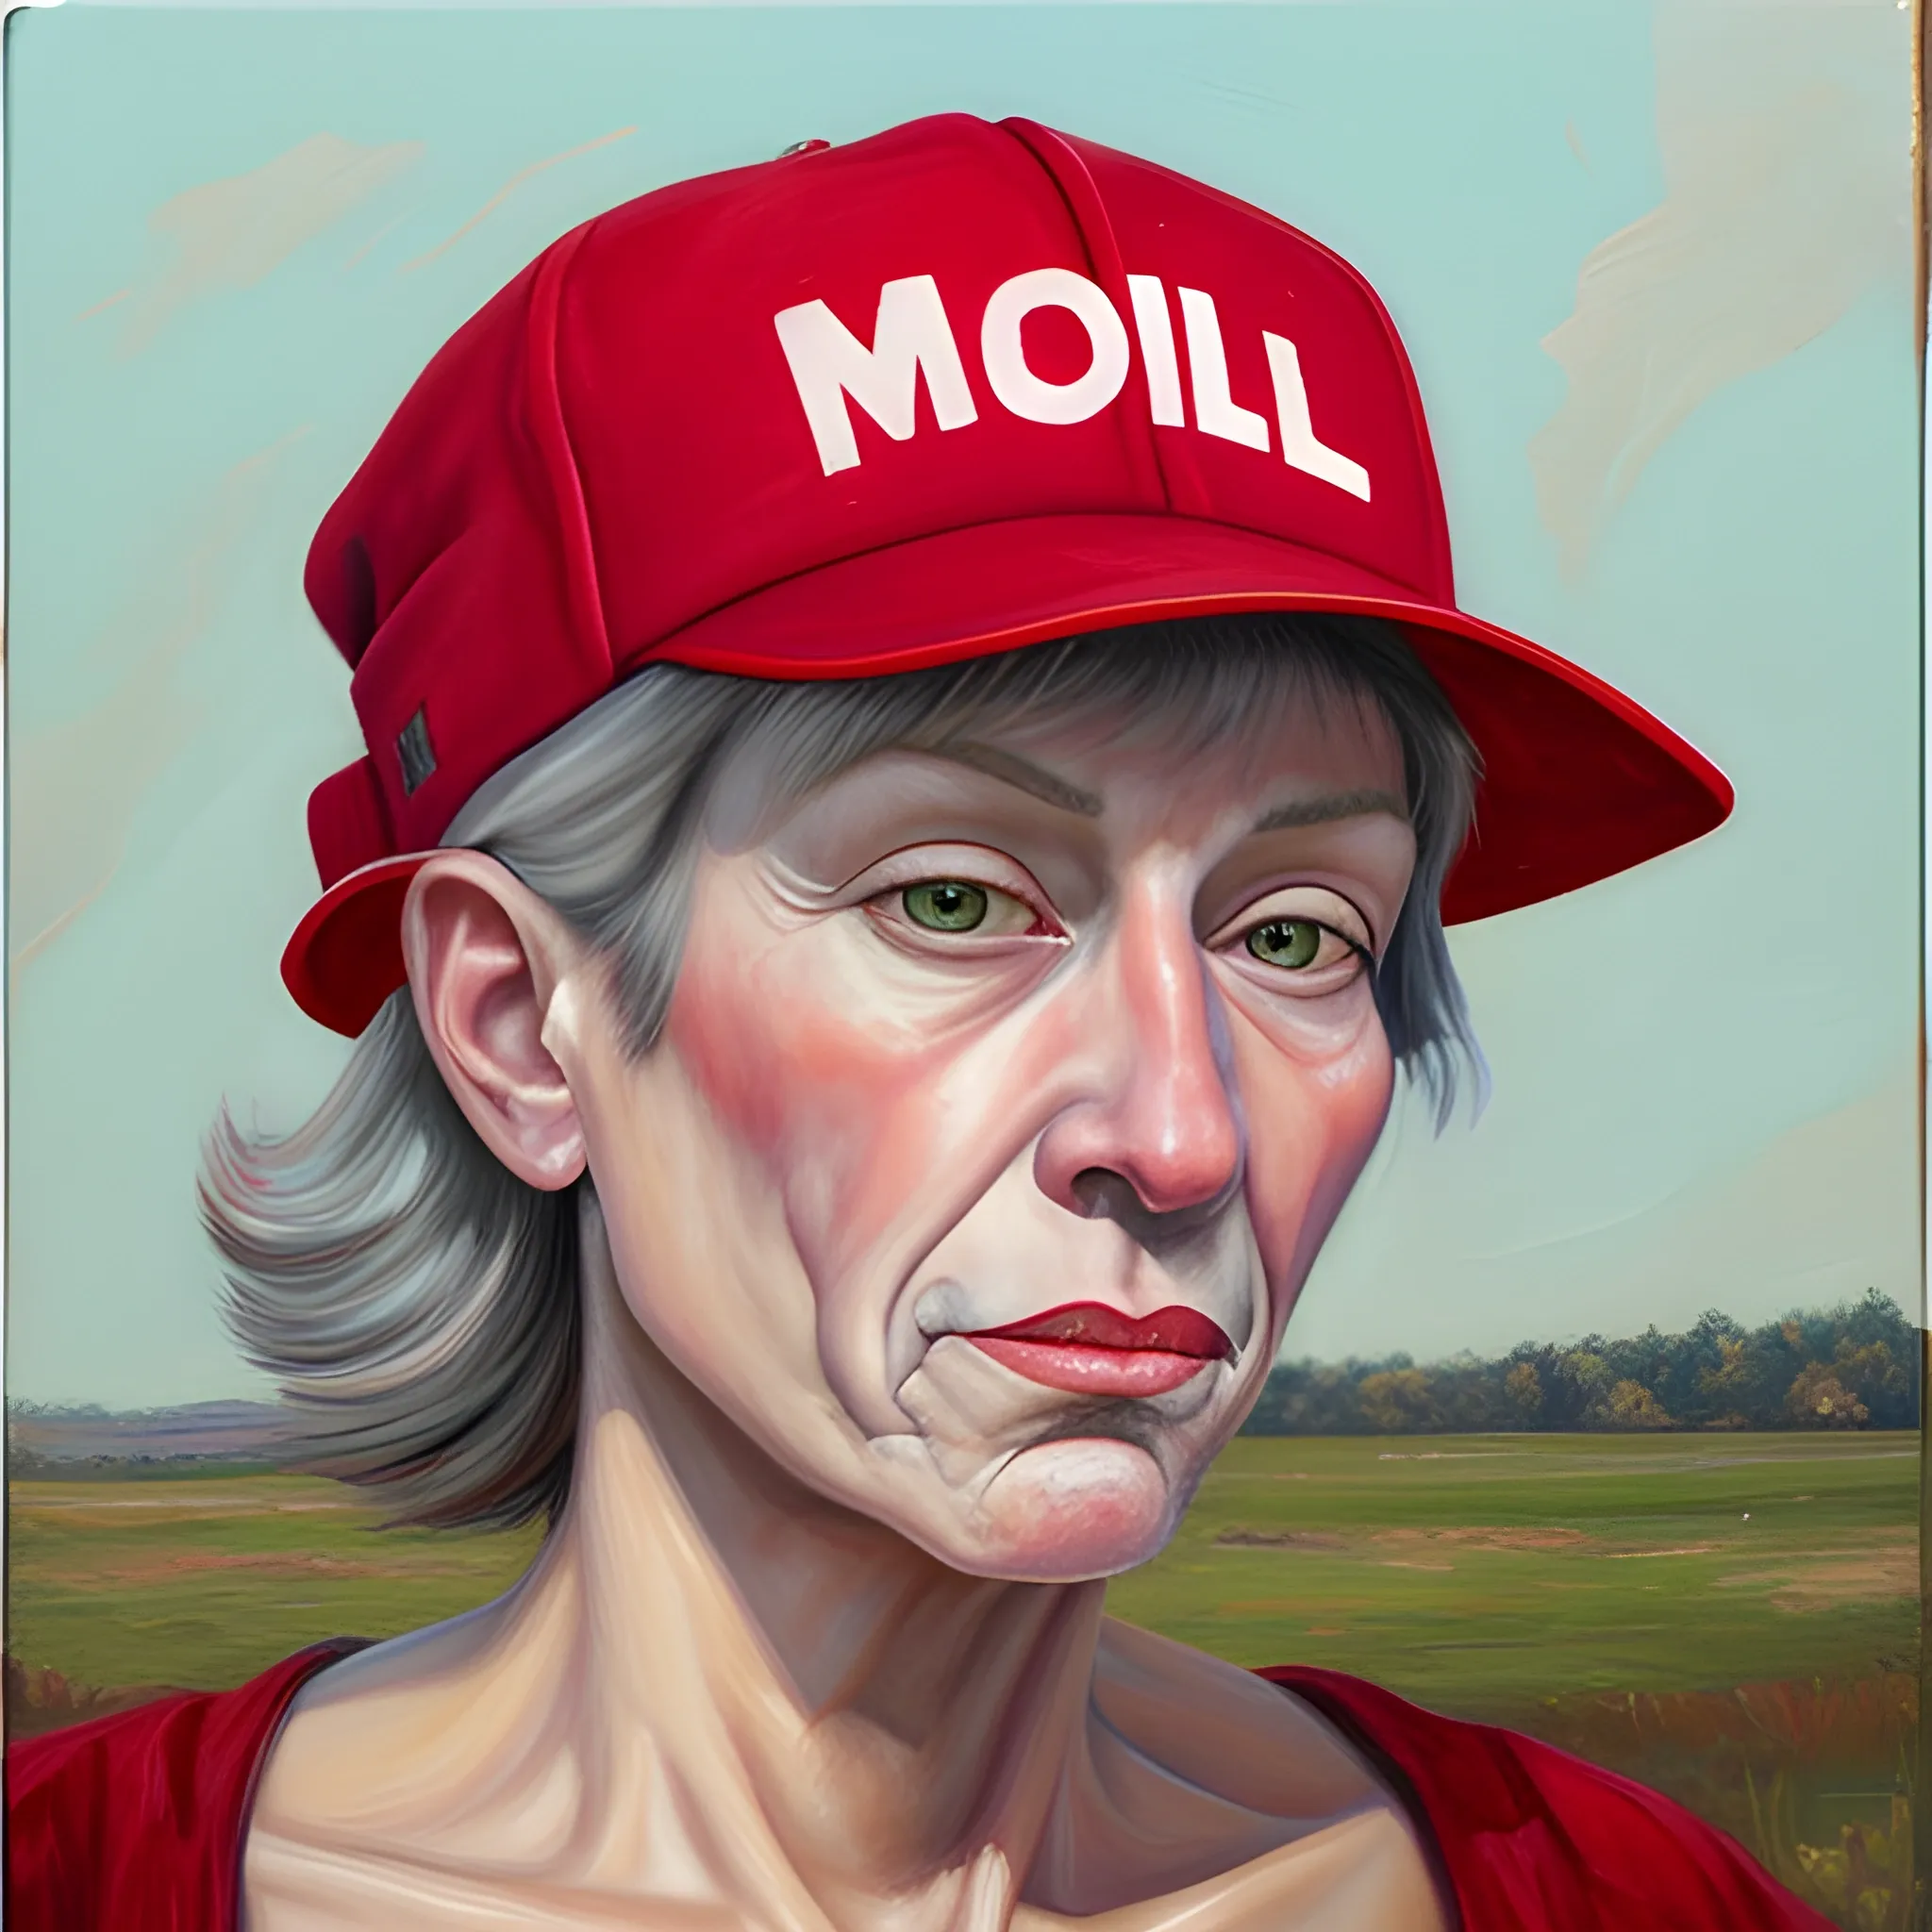  Oil Painting,
marjorie taylor, ugly, dyke,red  maga hat 
